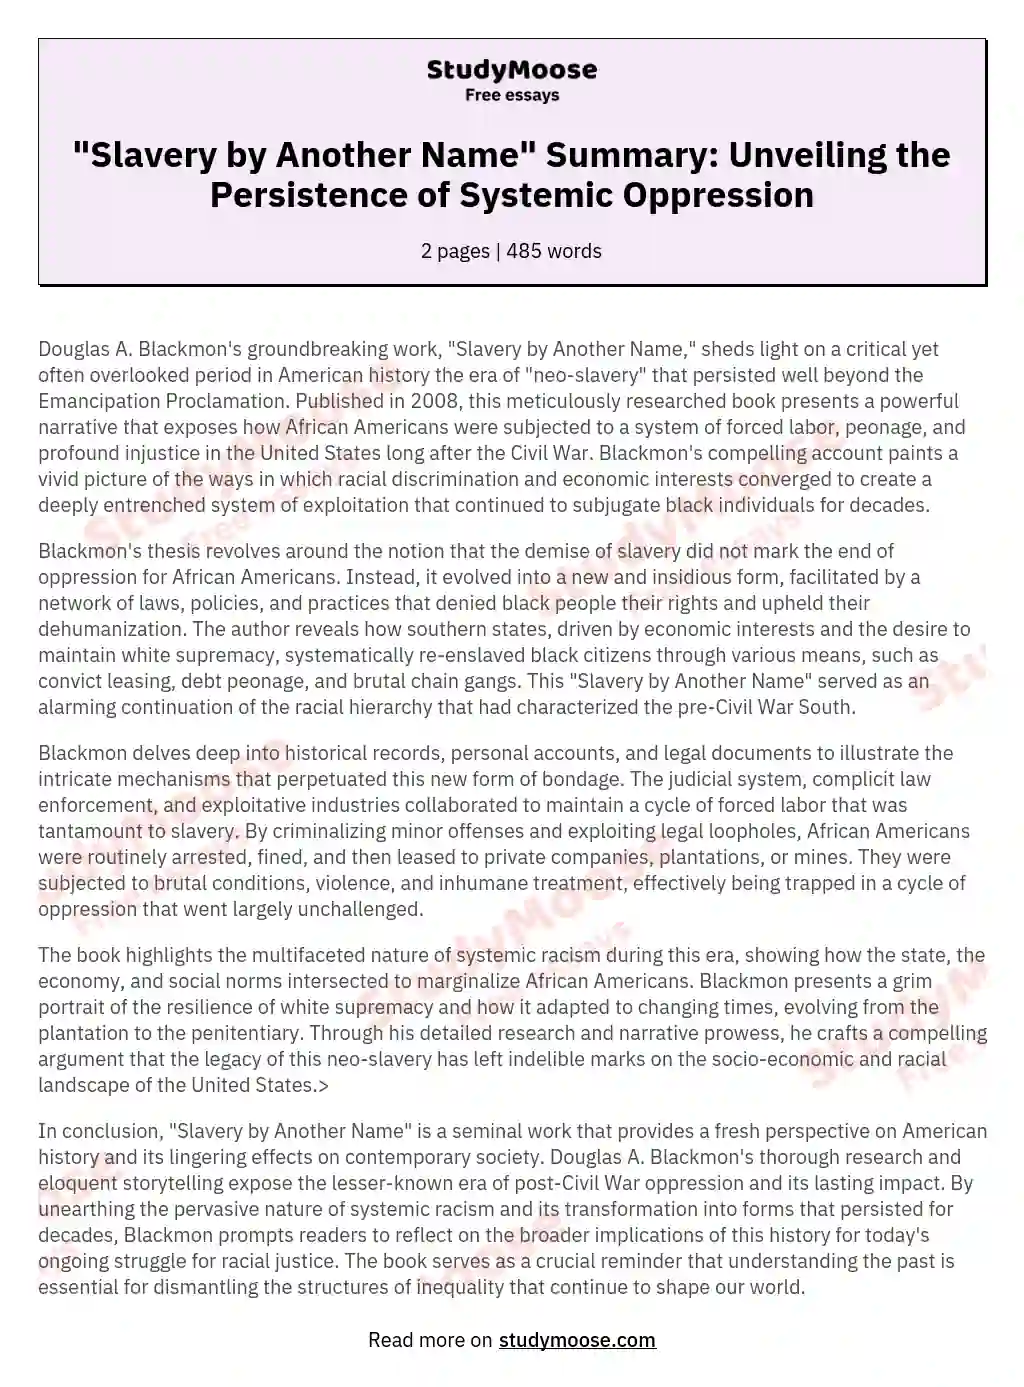 "Slavery by Another Name" Summary: Unveiling the Persistence of Systemic Oppression essay